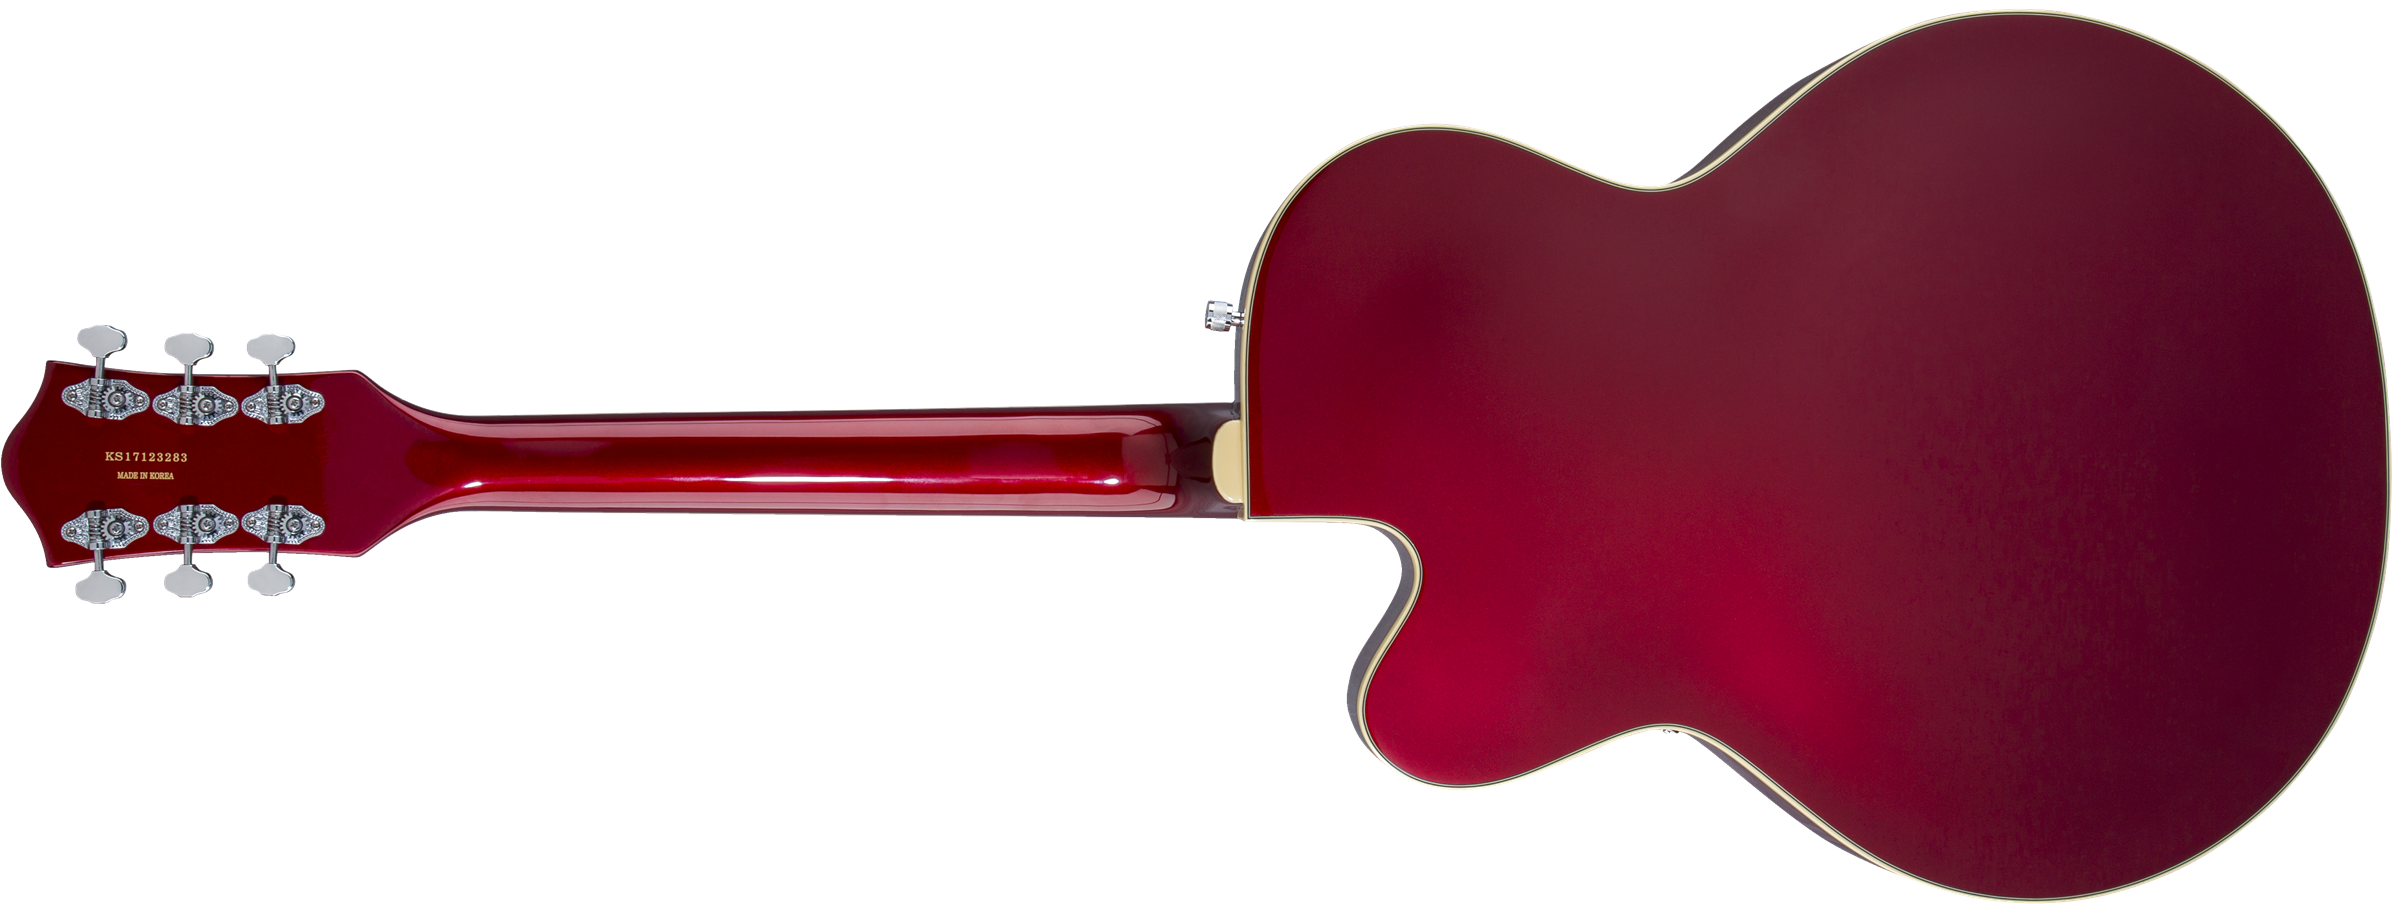 Gretsch G5420t Electromatic Hollow Body 2018 - Candy Apple Red - Semi-hollow electric guitar - Variation 1